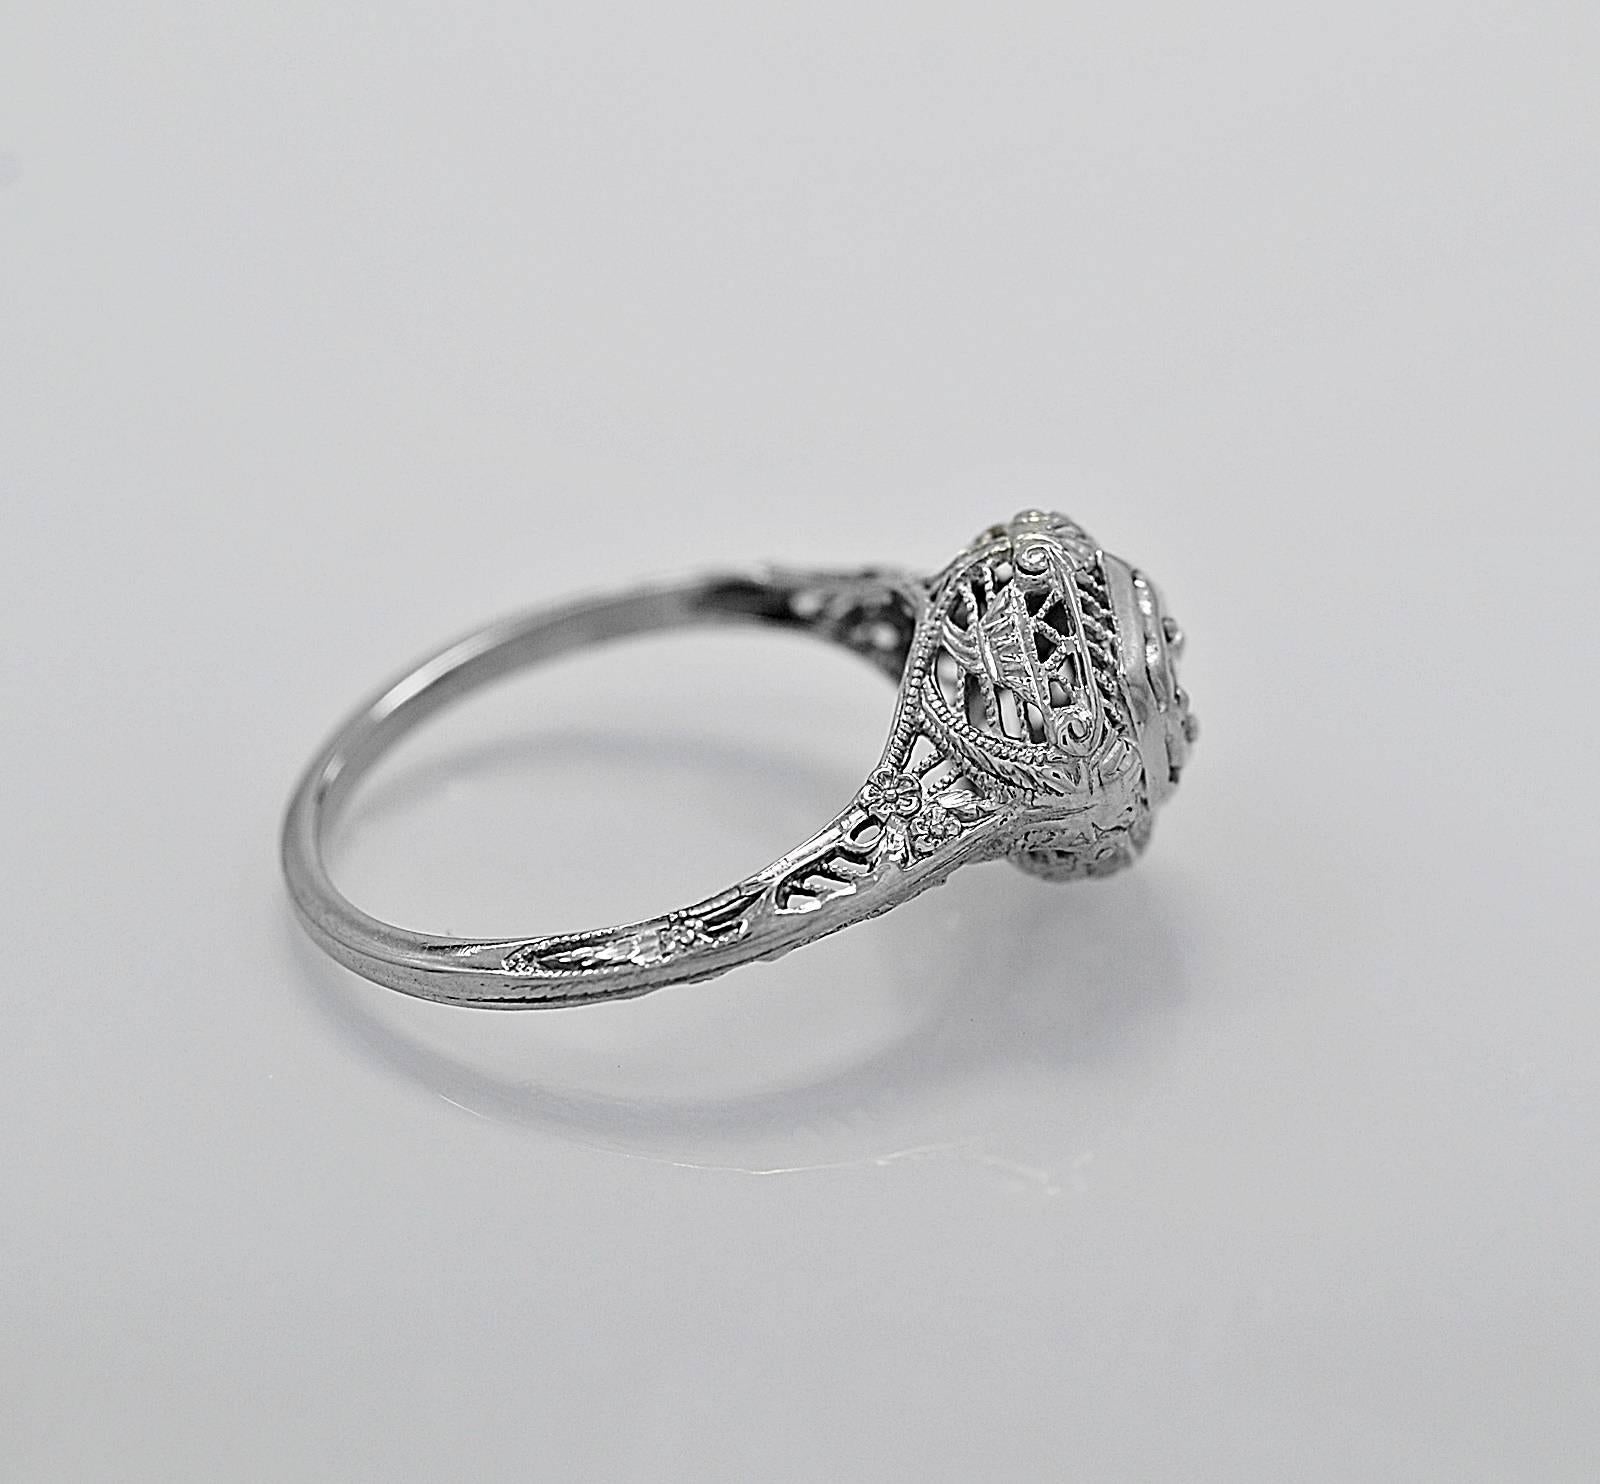 A meticulously filigreed antique engagement ring crafted in 18K white gold and features a .10ct. apx. transitional cut center diamond with VS2 clarity and G color. Notice the filigree surrounds the diamond, completes the gallery and moves down the